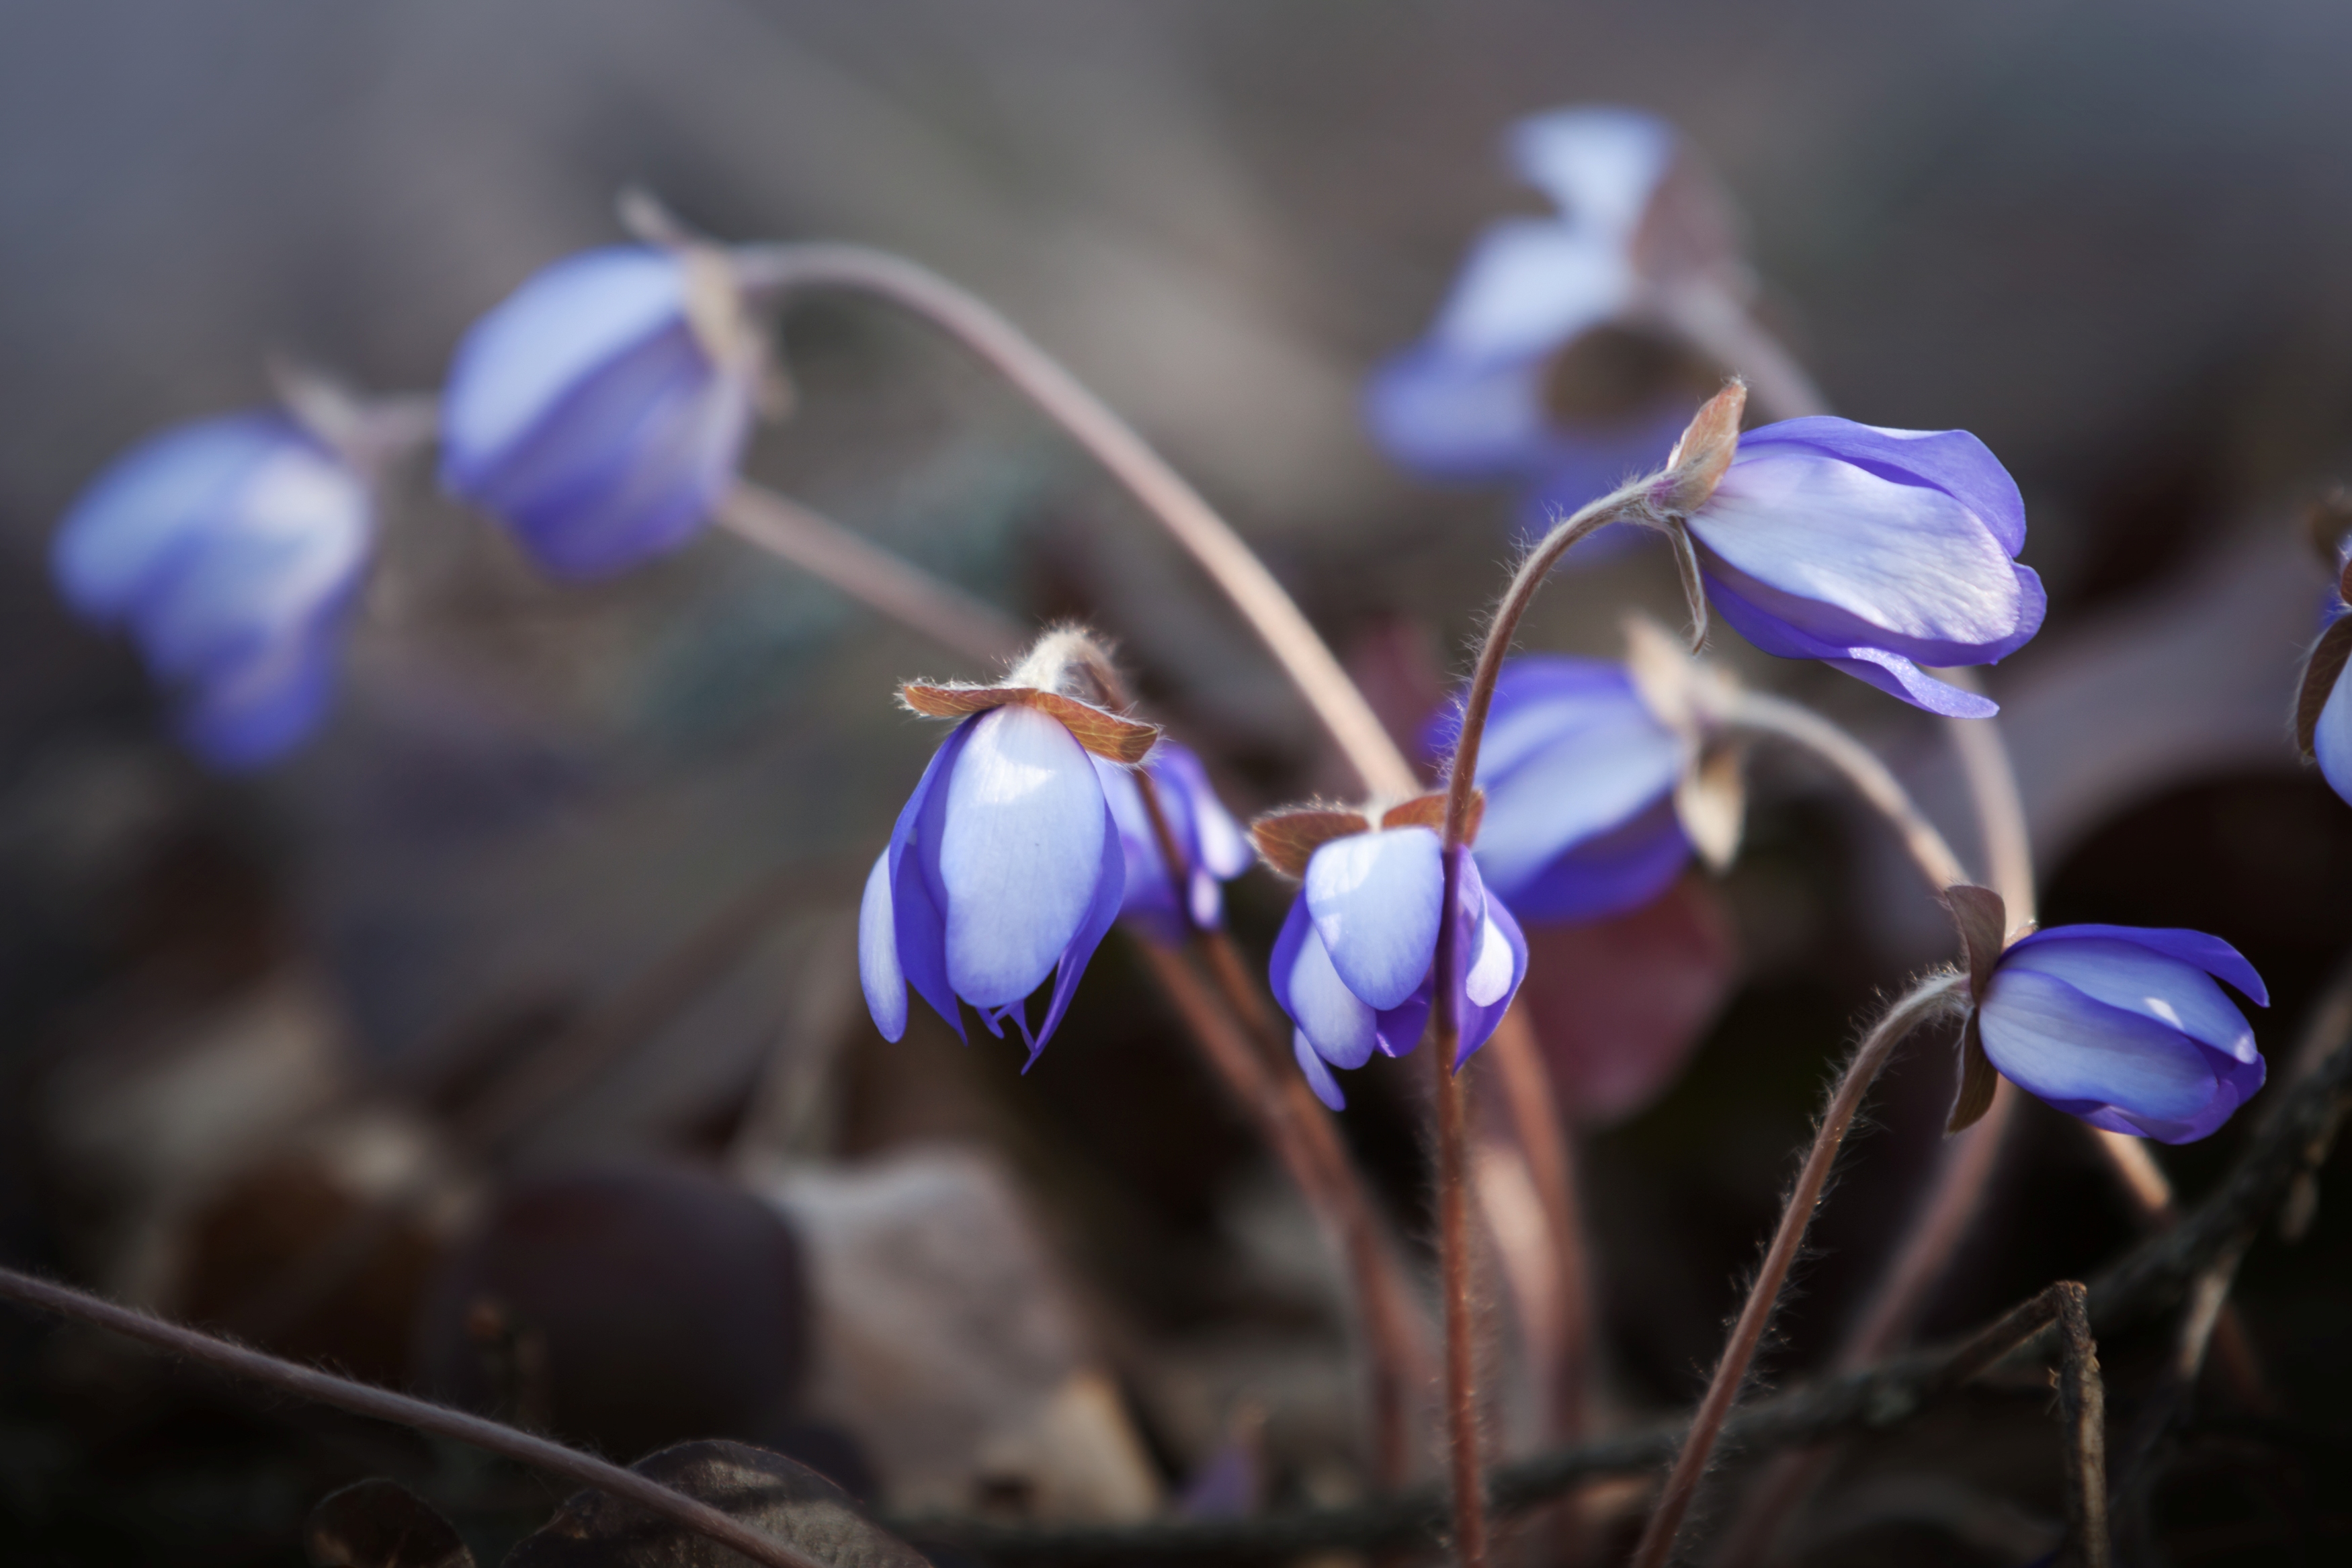 Blue Hepatica flowers in the spring forest. Macro photo